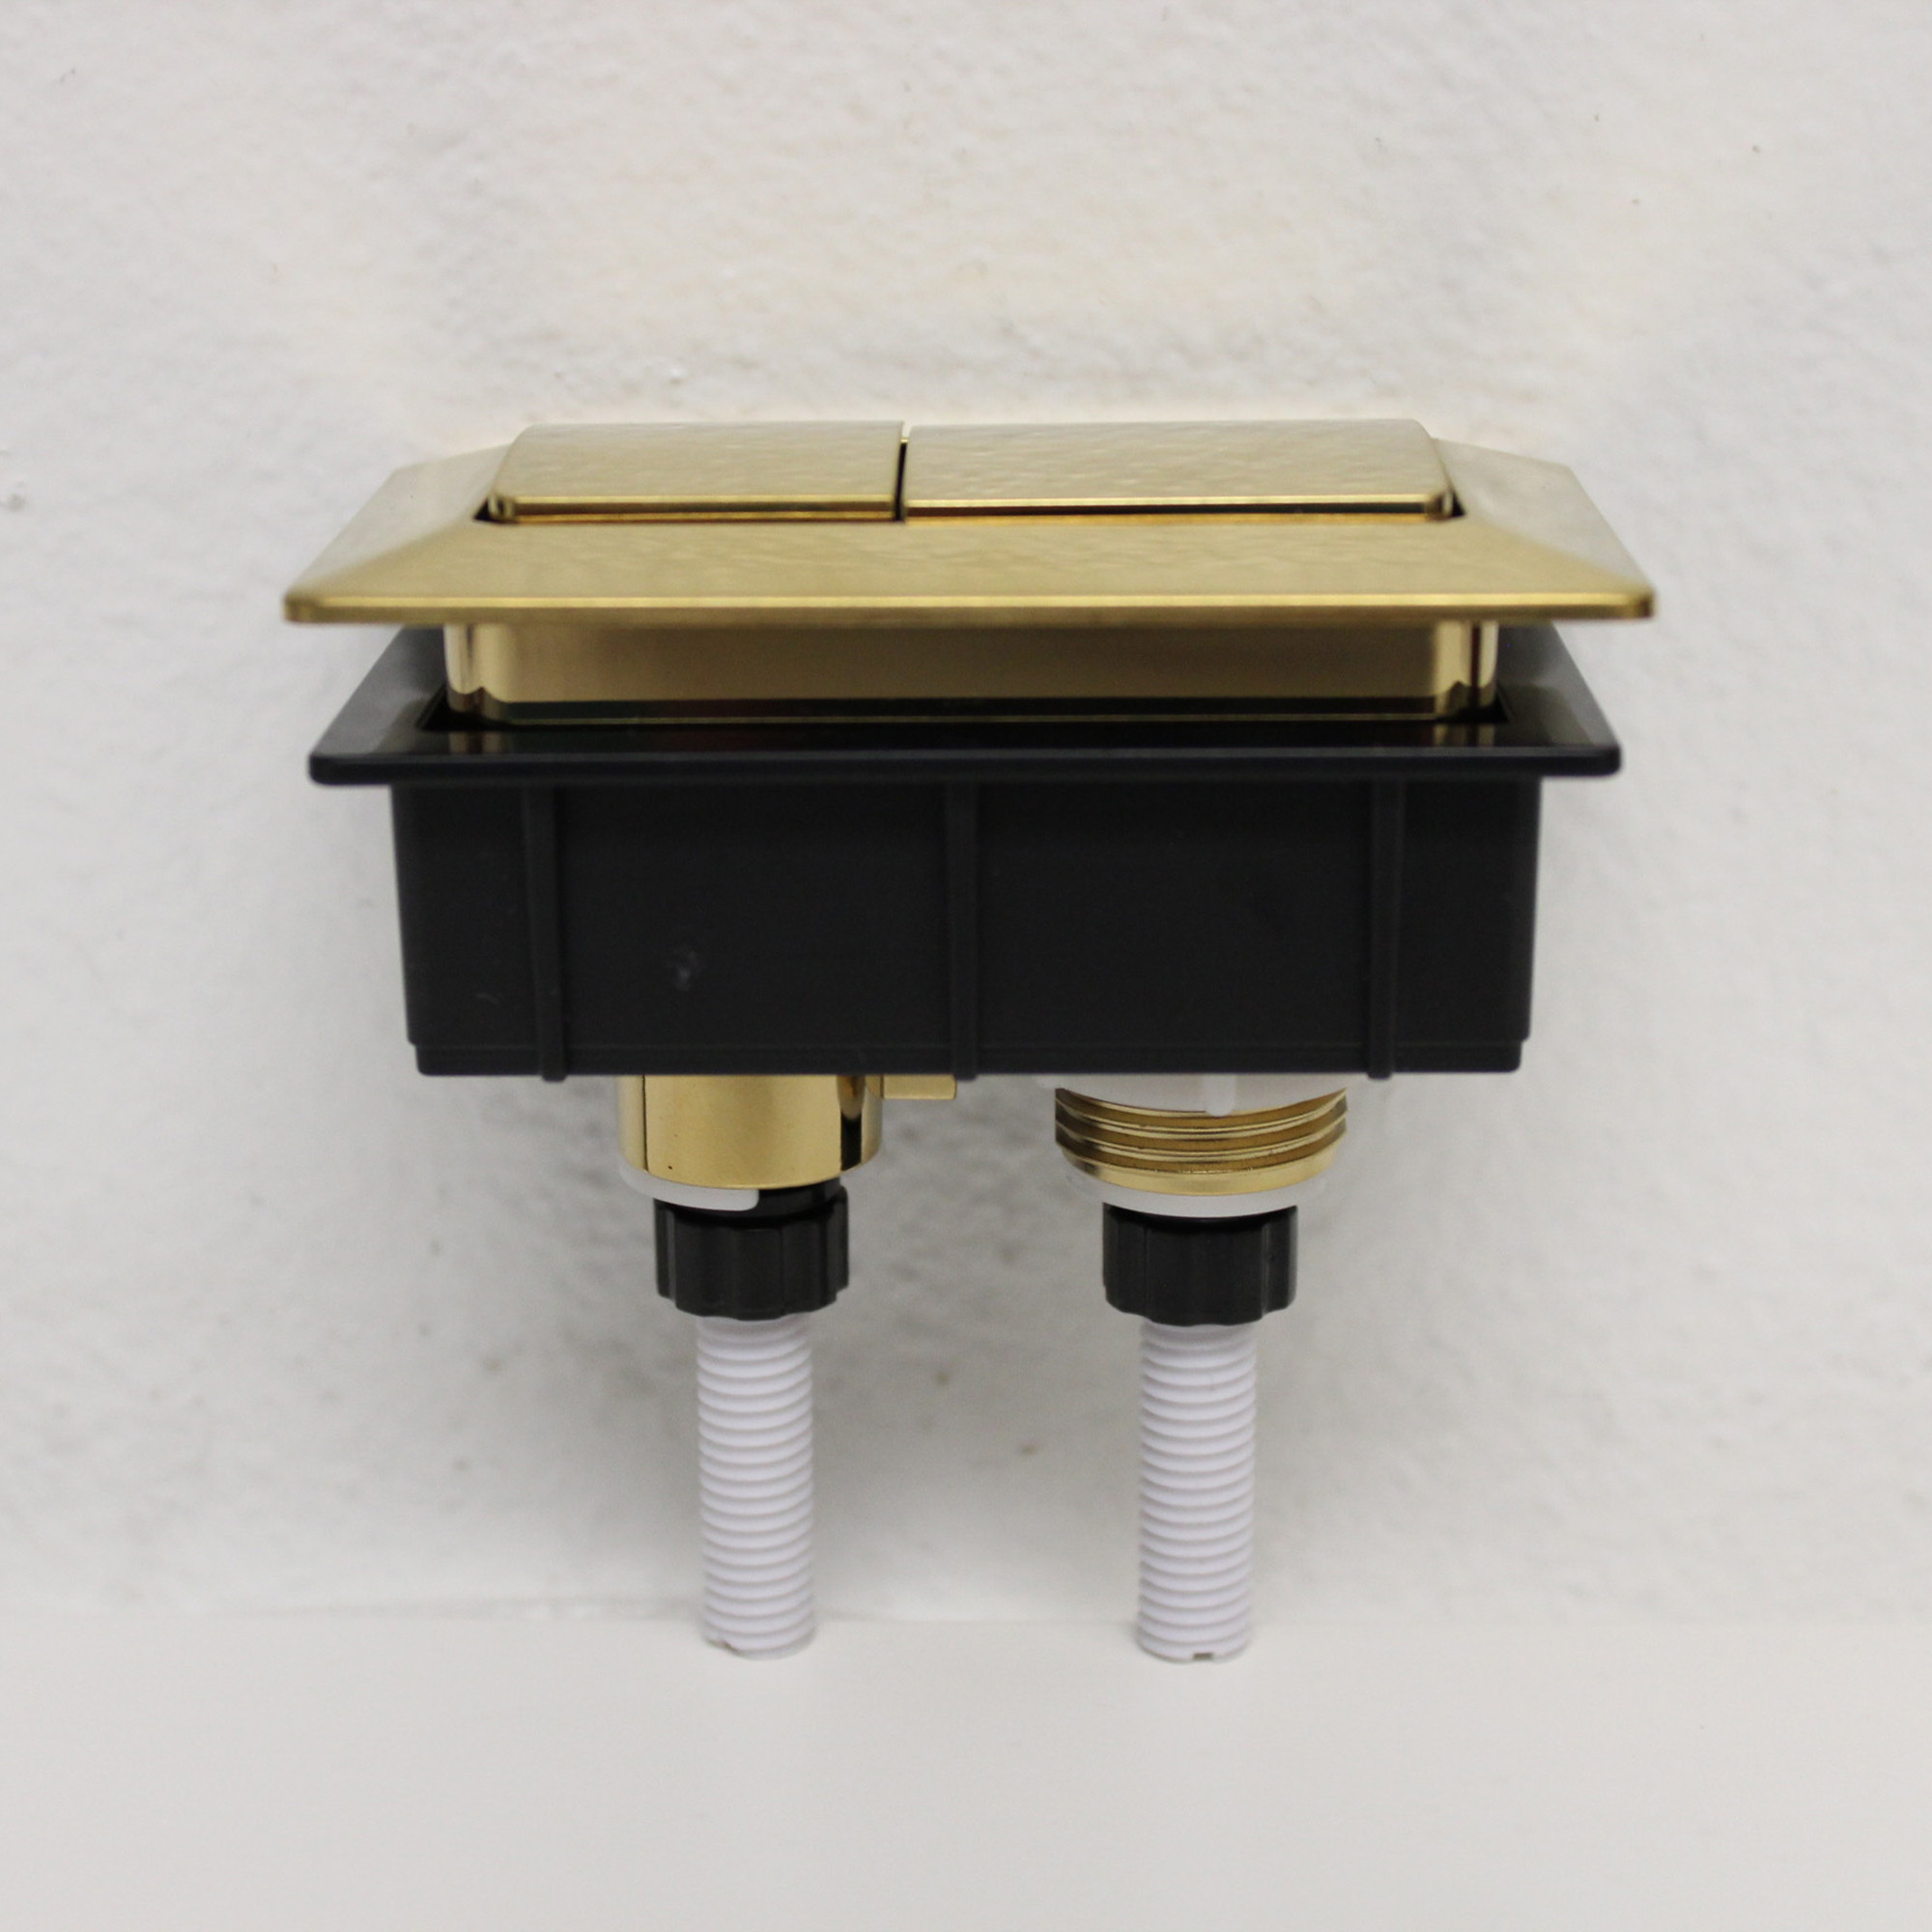  Toilet Flush Button in Brushed Gold_13891